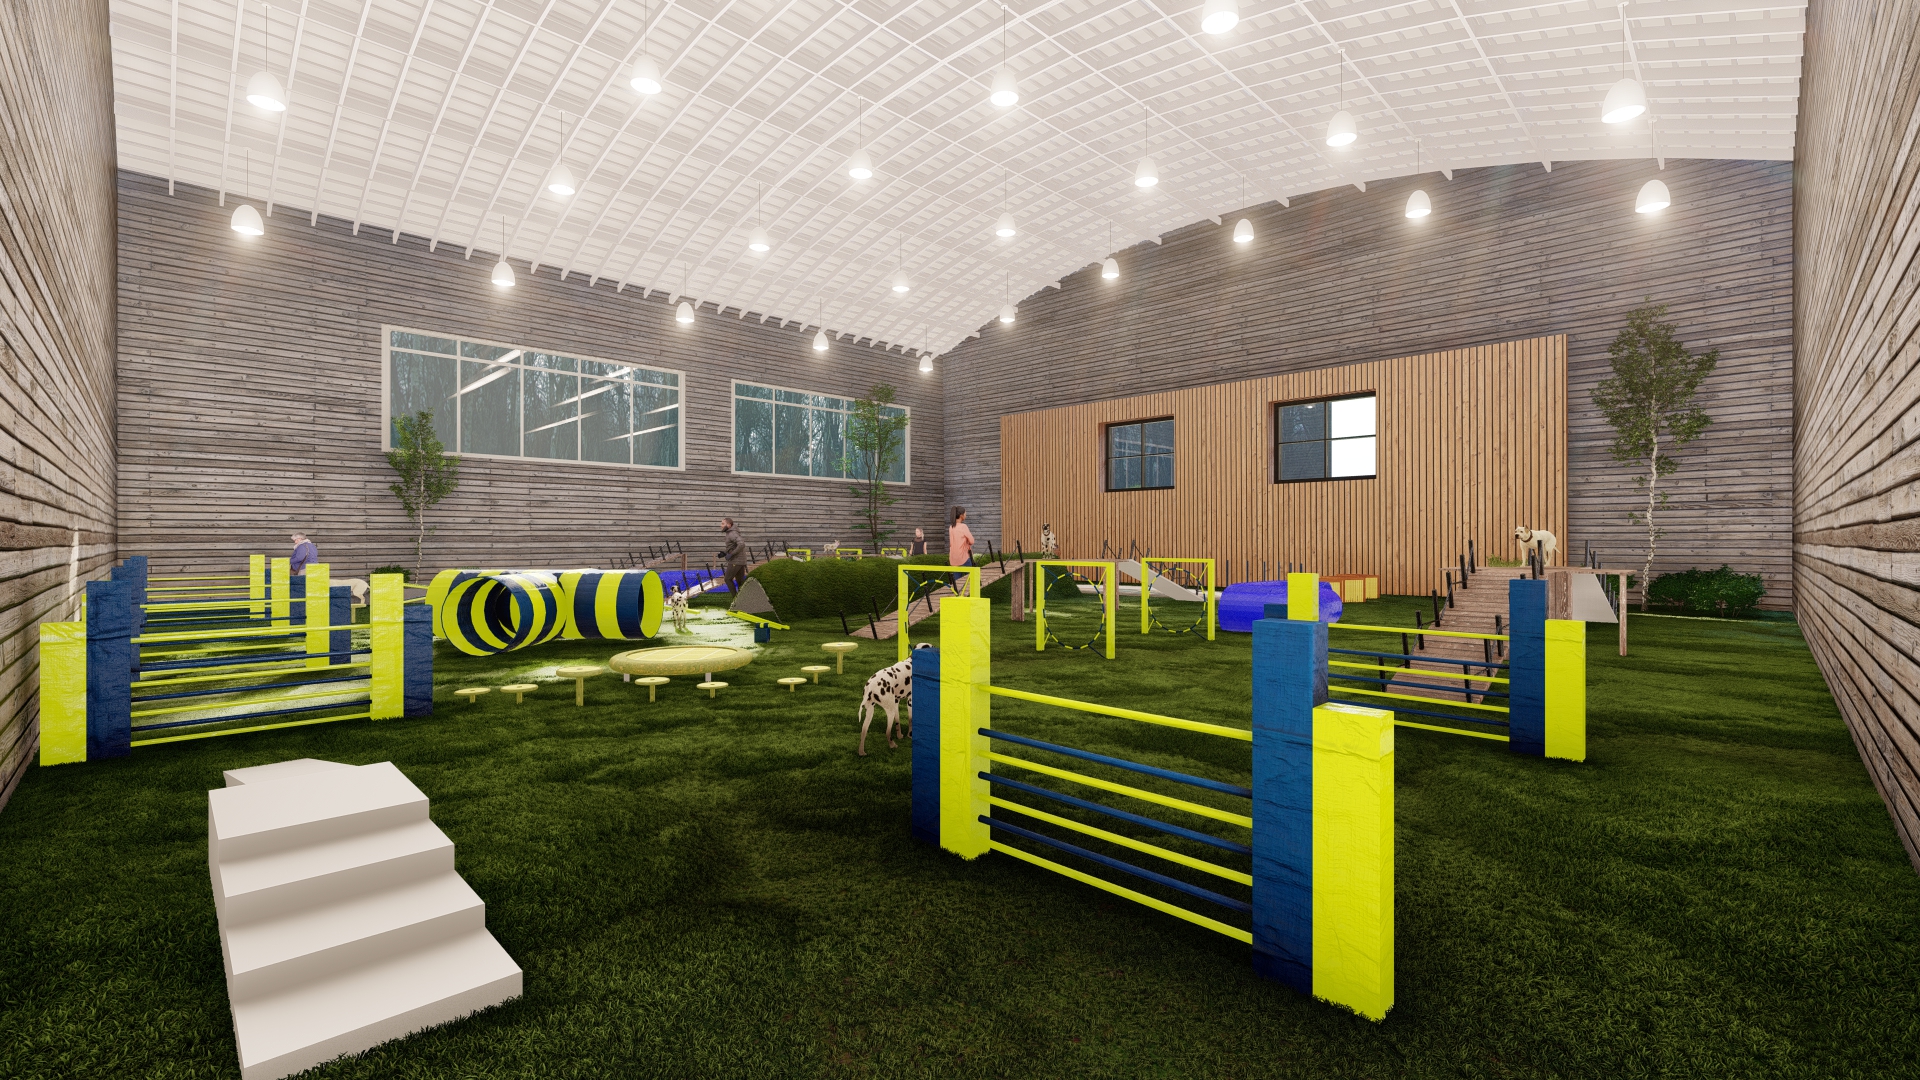 The new Hotel will offer an indoor dog park for those rainy days!